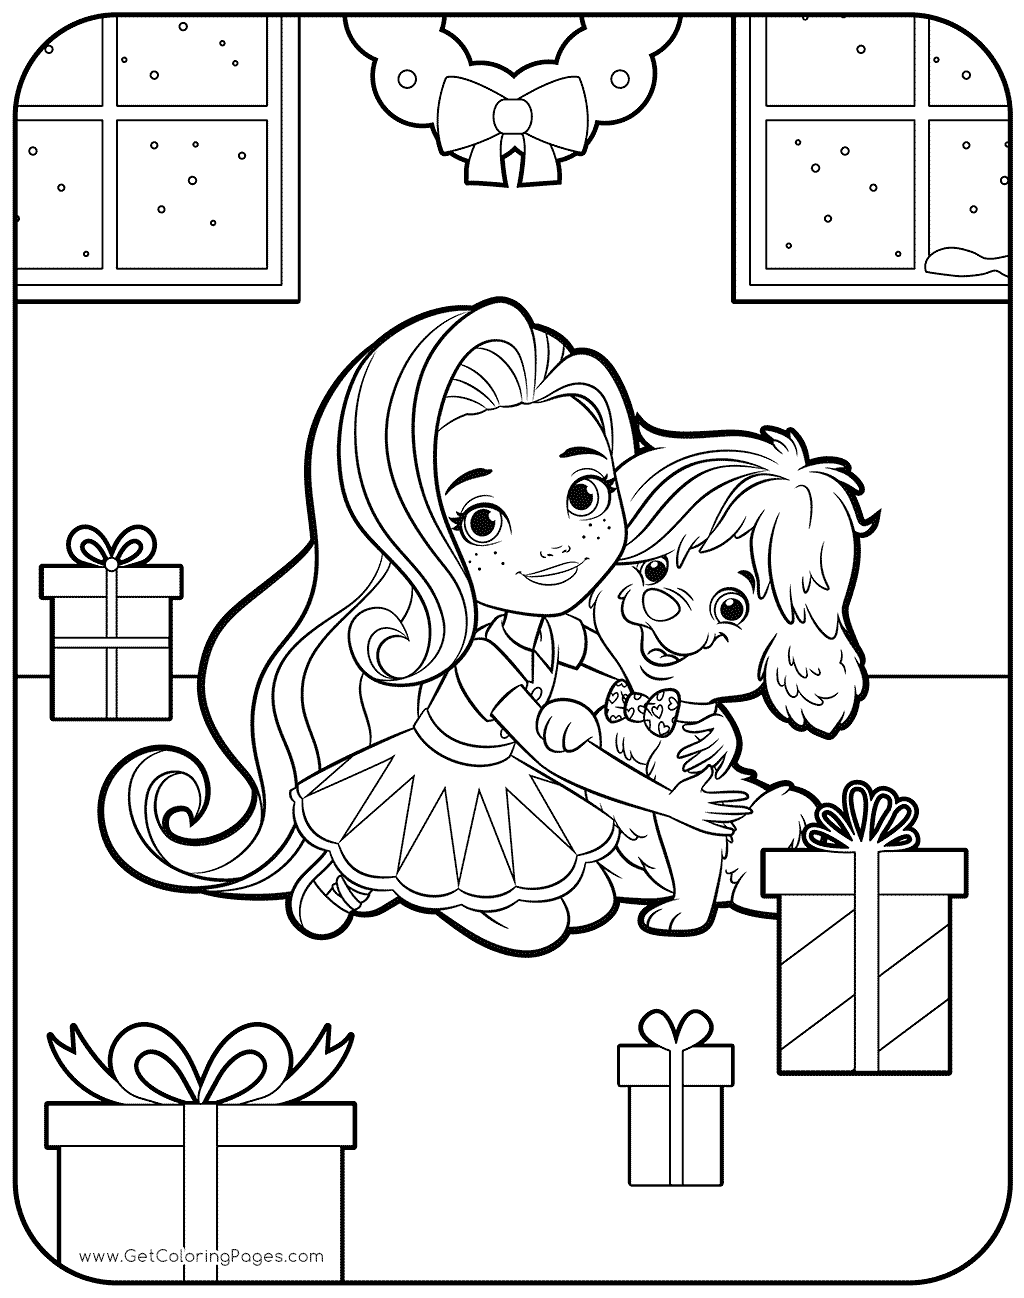 Sunny Day Coloring Pages at GetColorings.com | Free printable colorings ...